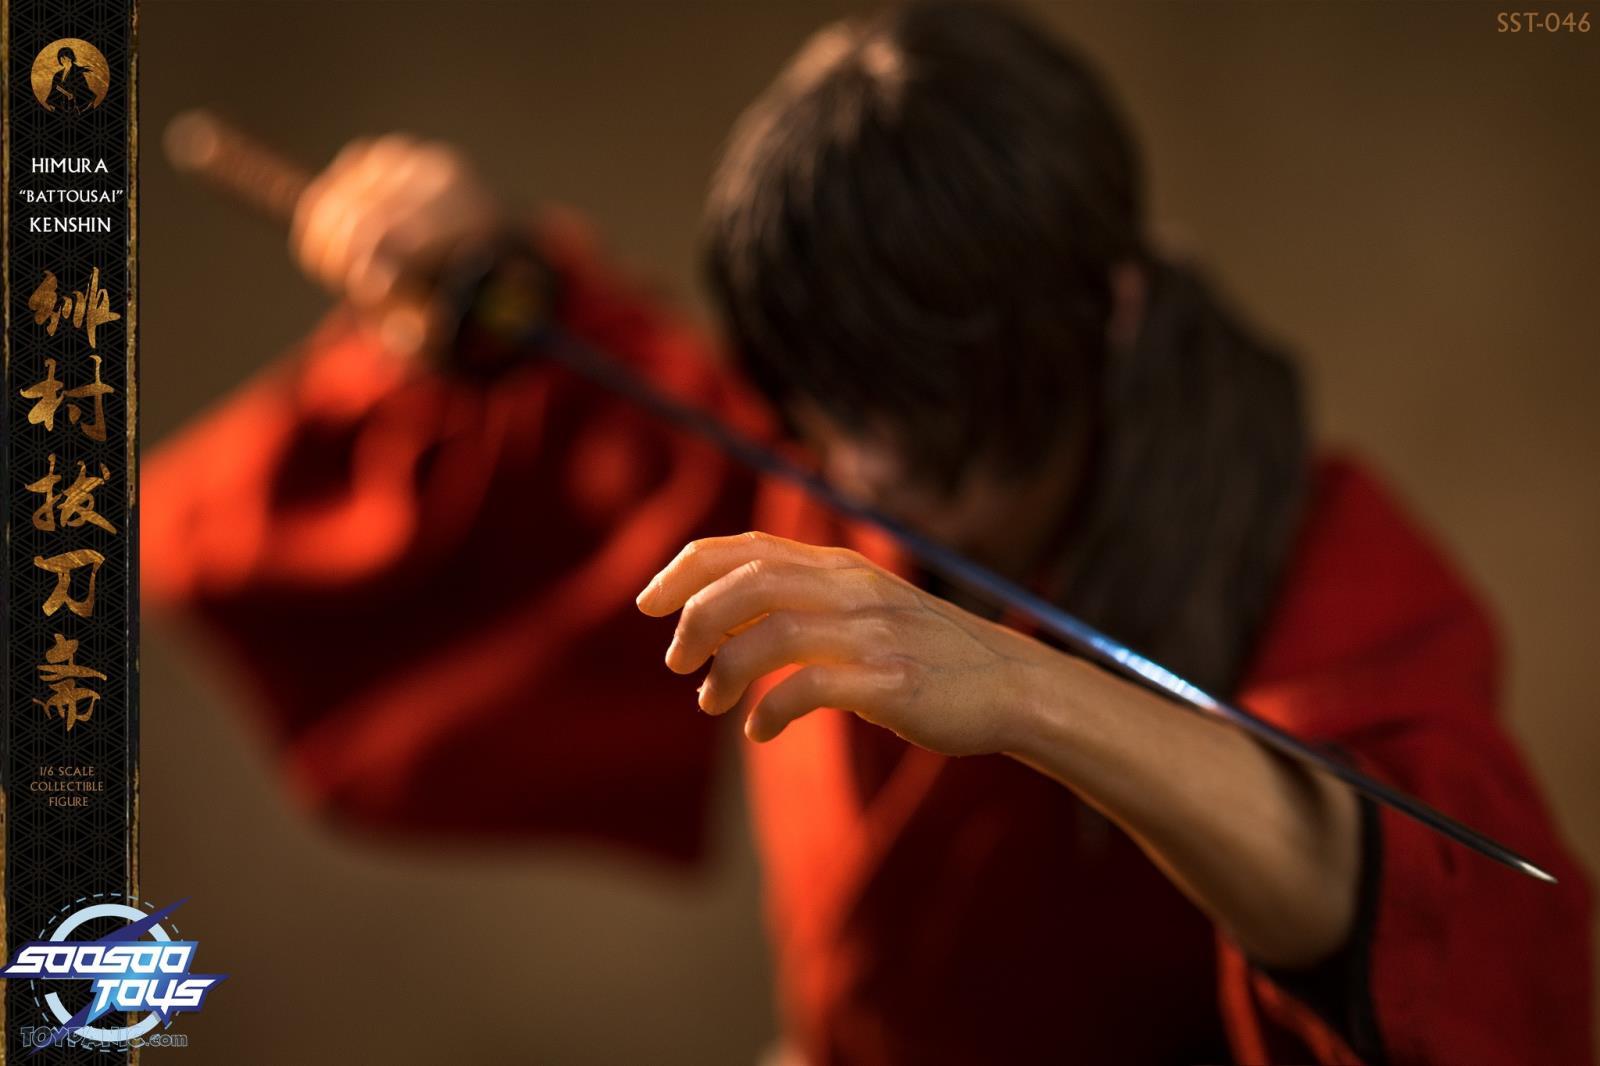 NEW PRODUCT: 1/6 scale Rurouni Kenshin Collectible Figure from SooSooToys 712202251229PM_8652112